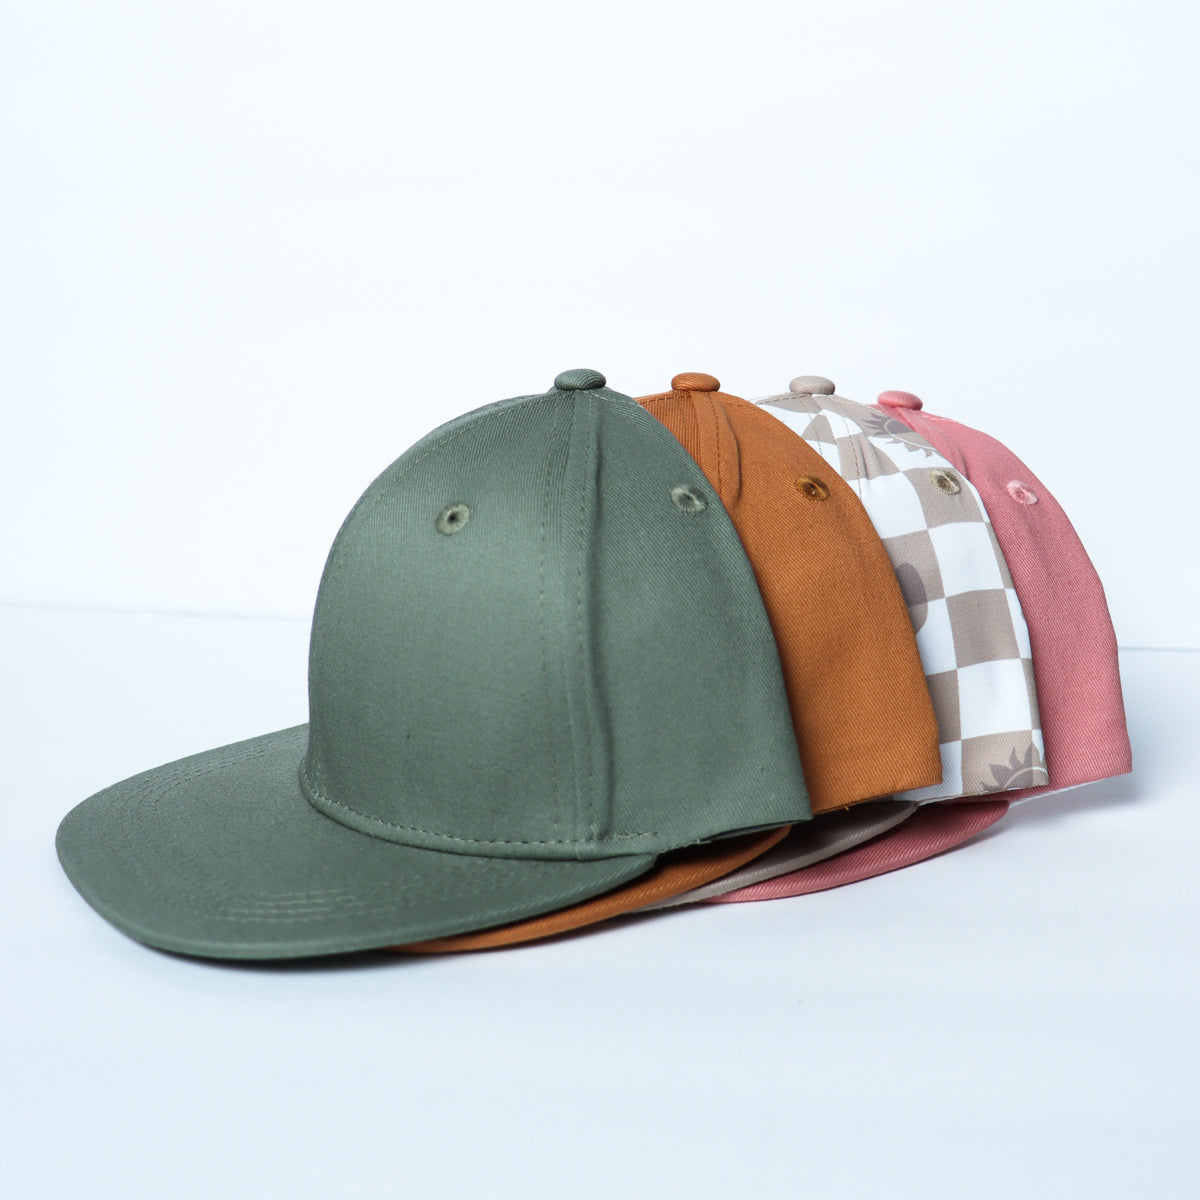 exclusive pattern by mks miminoo arizona usa boys girls baby to adult cap trucker hat solid blank wholesale 4 panel baseball sun protection sage green dusty pink terracotta checker beige